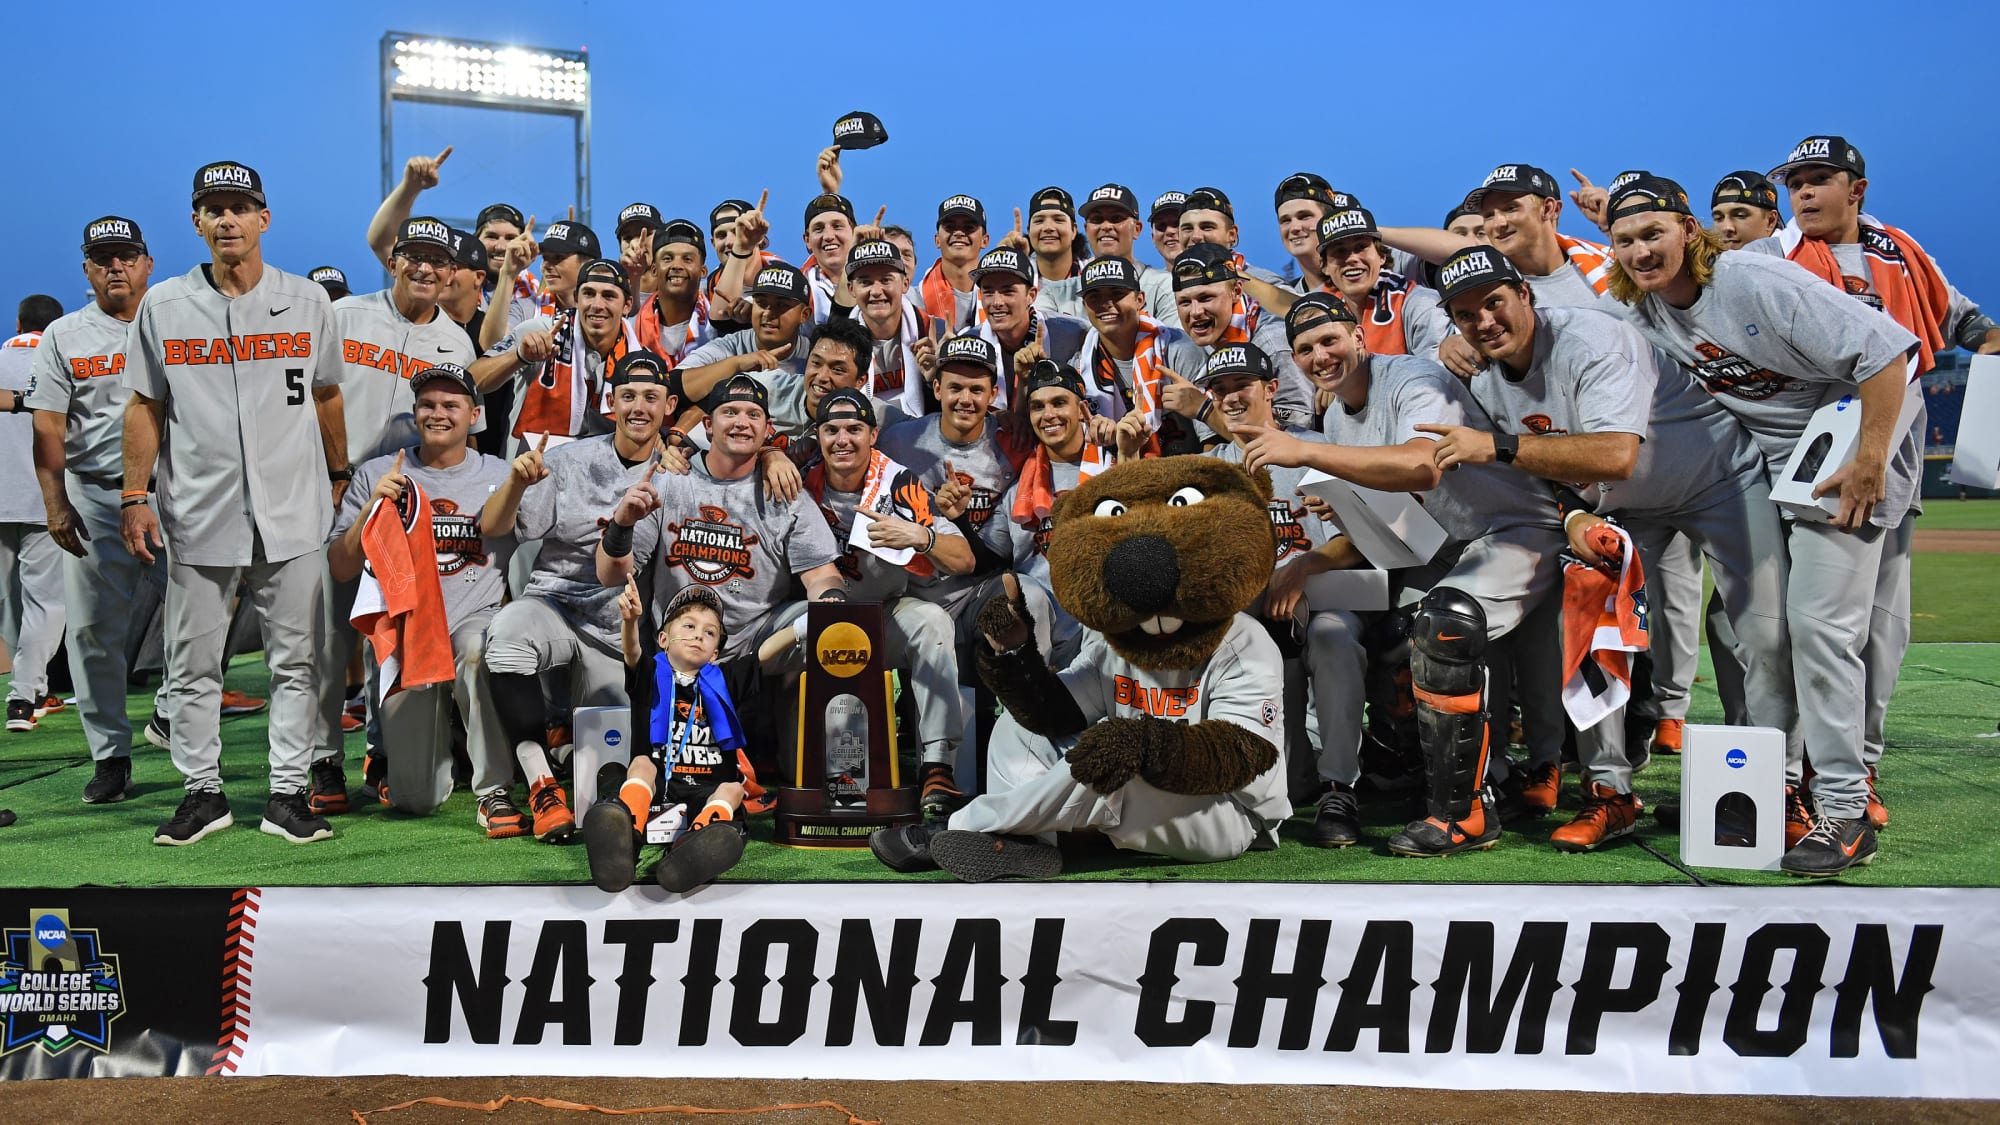 When does the 2019 College World Series start?